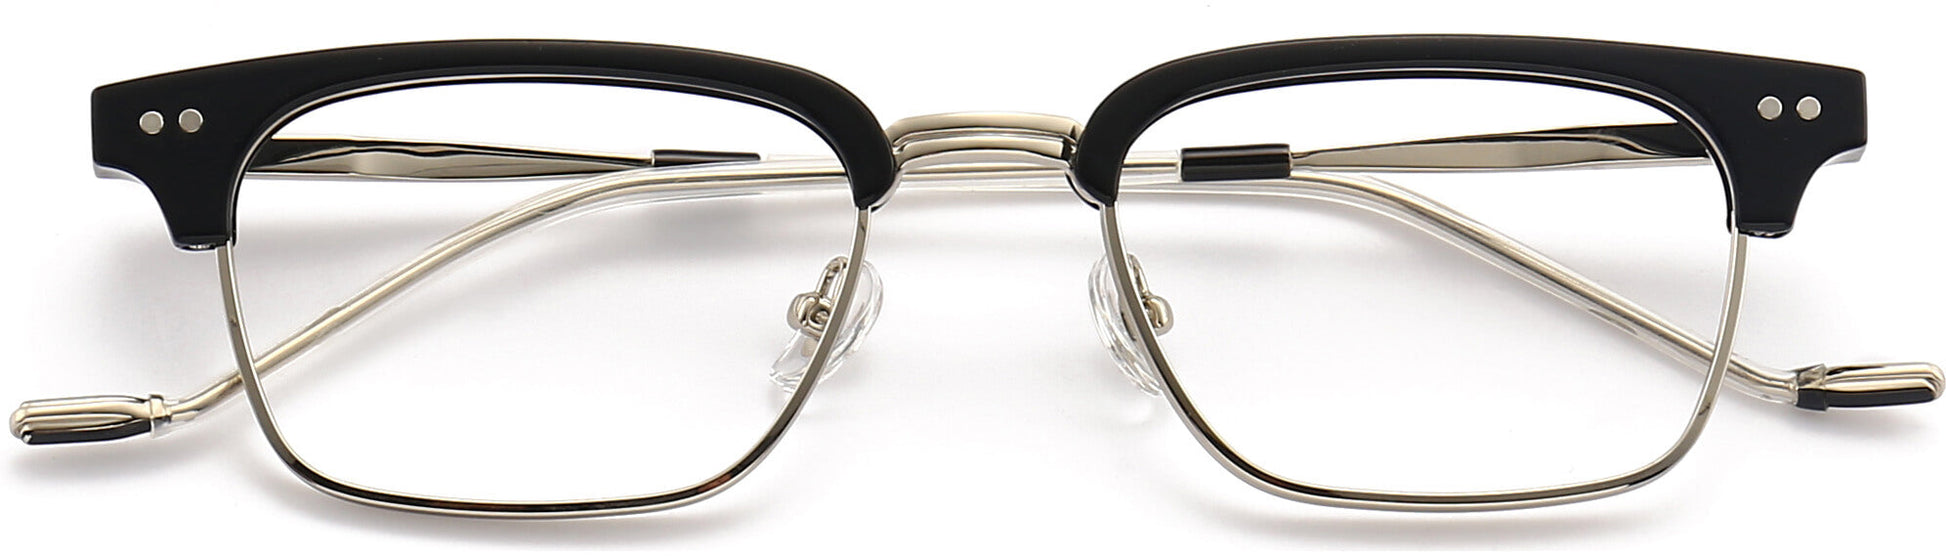 Zyaire Browline Black Eyeglasses from ANRRI, closed view